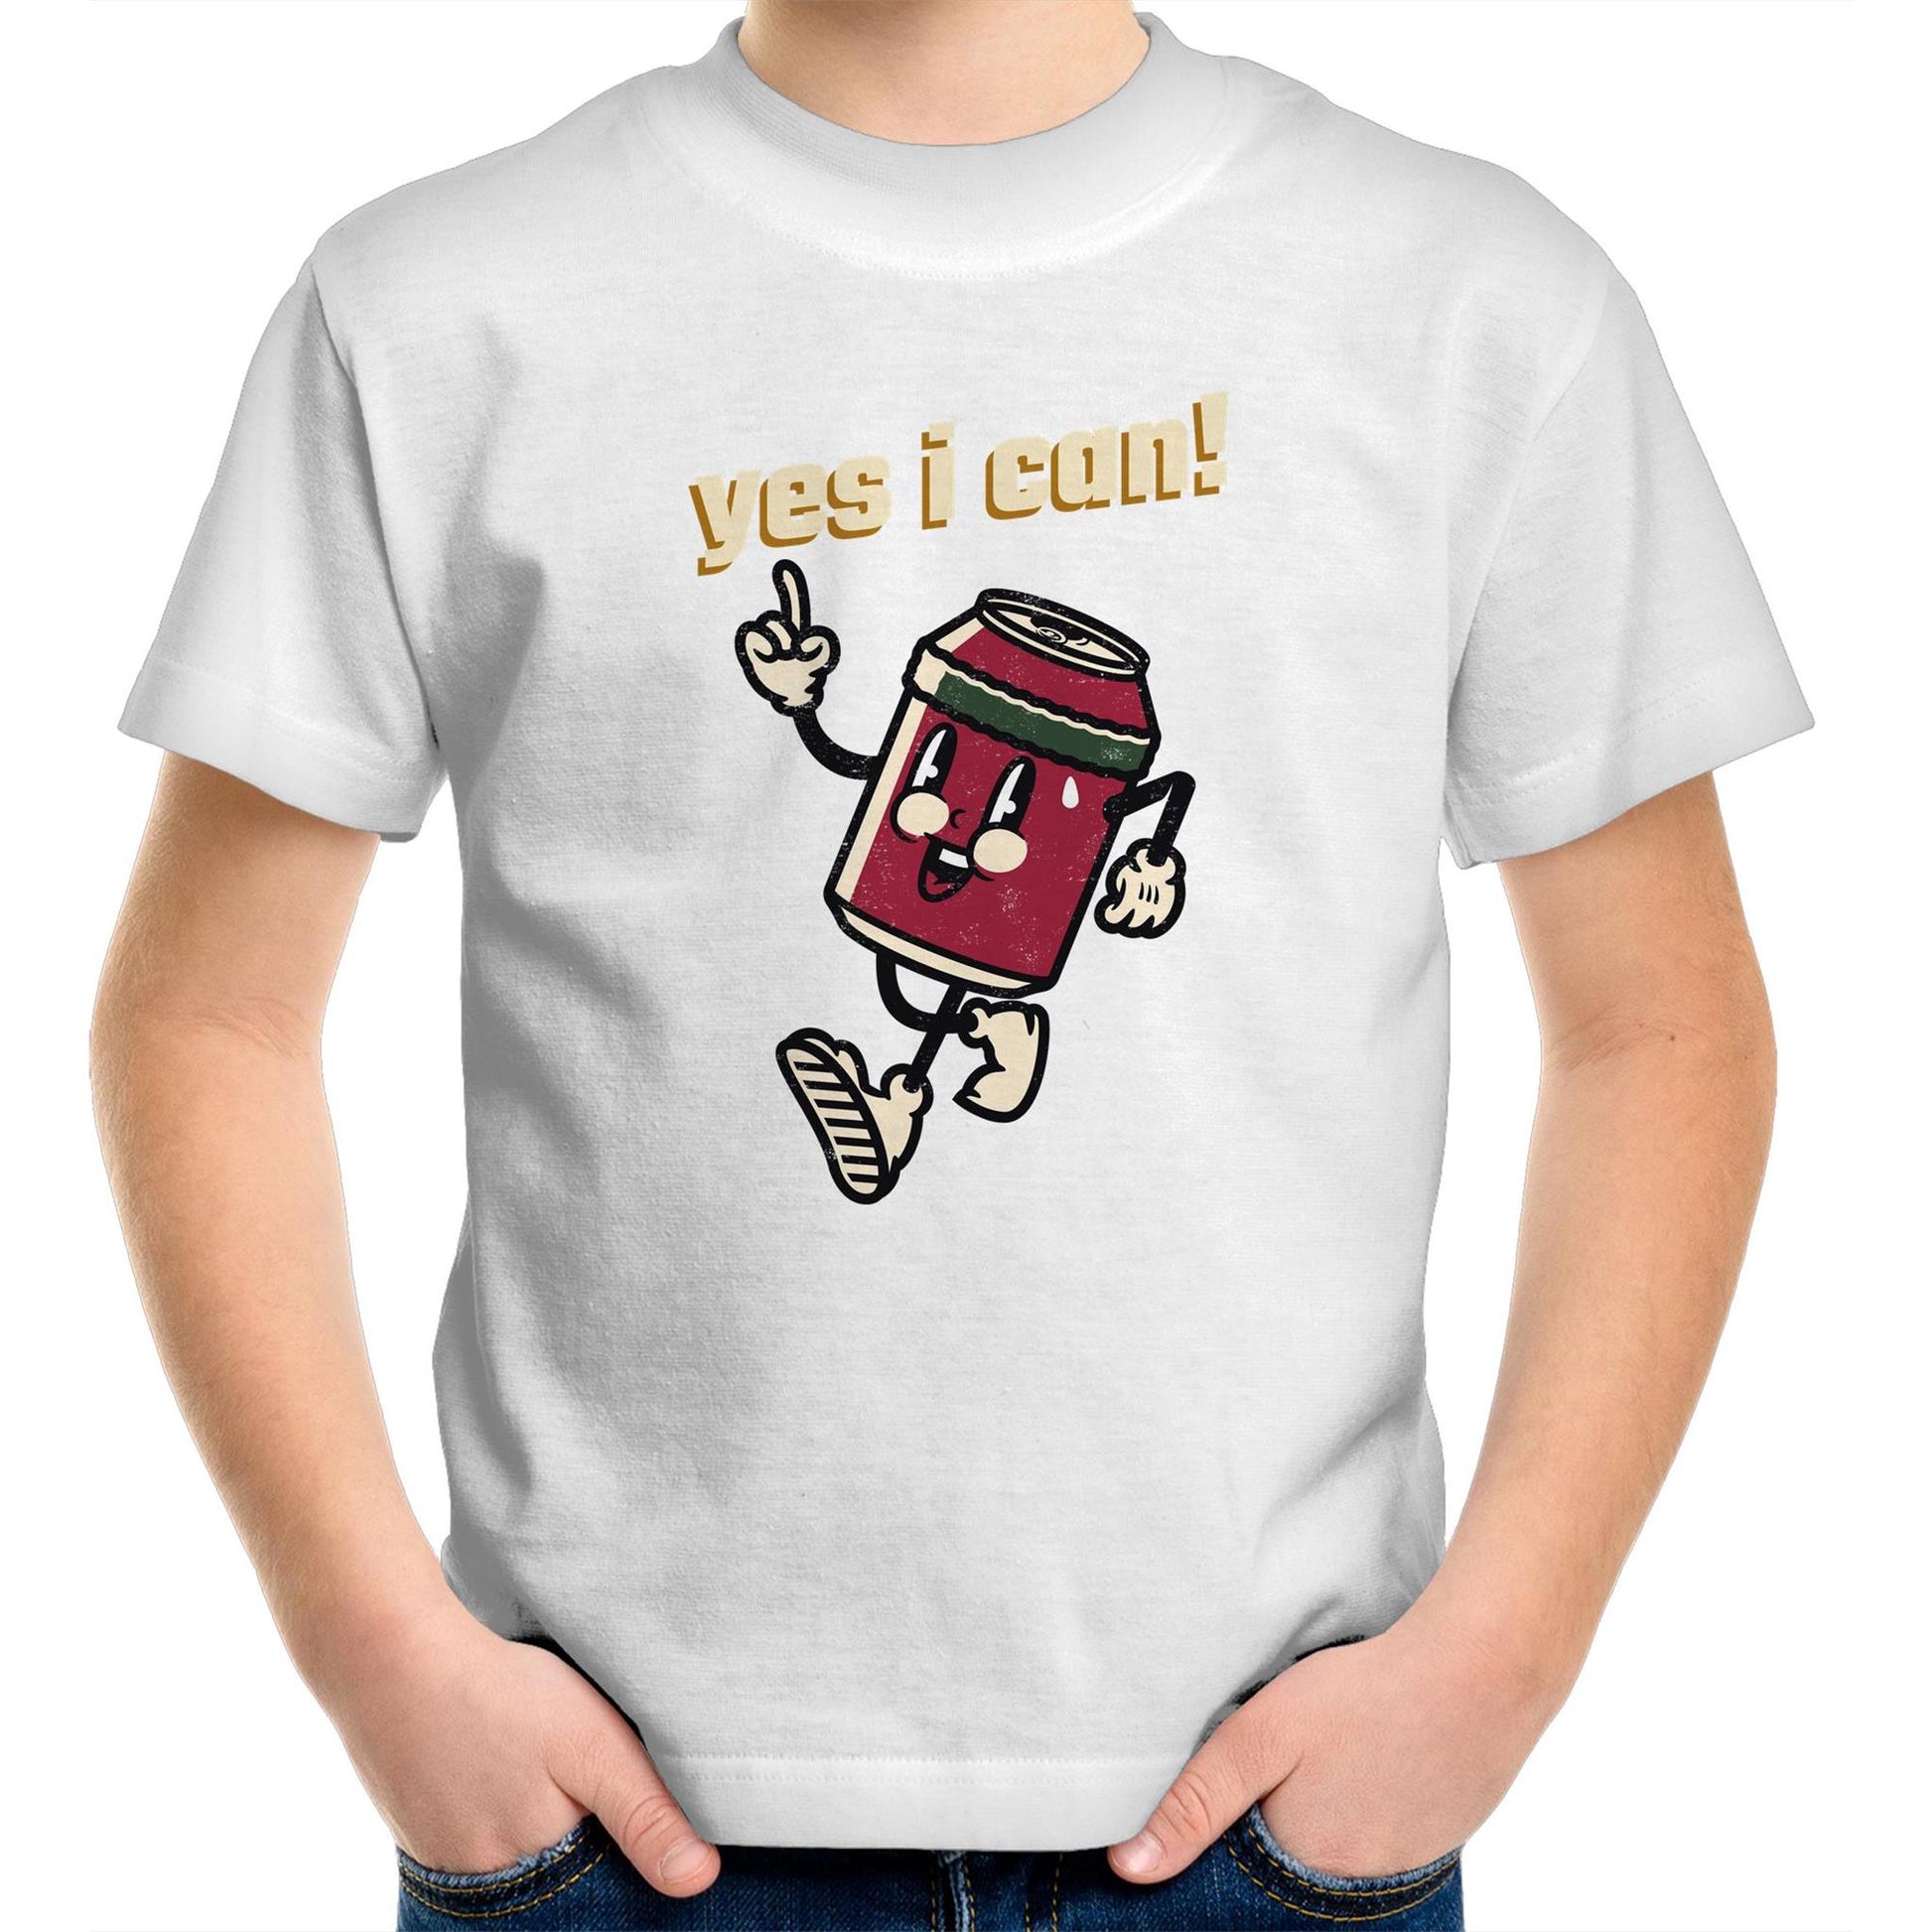 Yes I Can! - Kids Youth Crew T-Shirt White Kids Youth T-shirt Motivation Retro